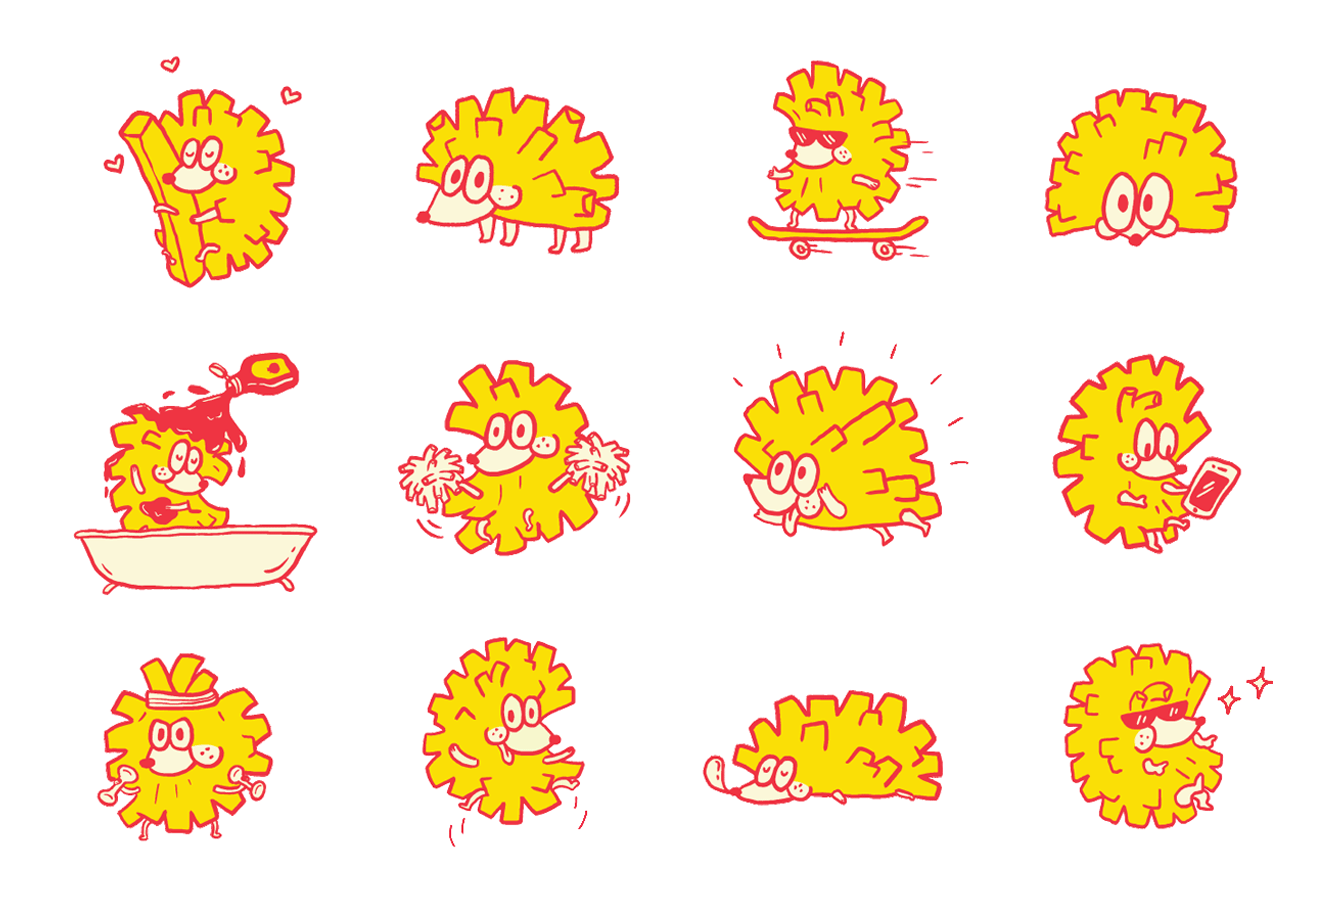 Animated hedgehog character mascot design for food and beverage brand Pompoms